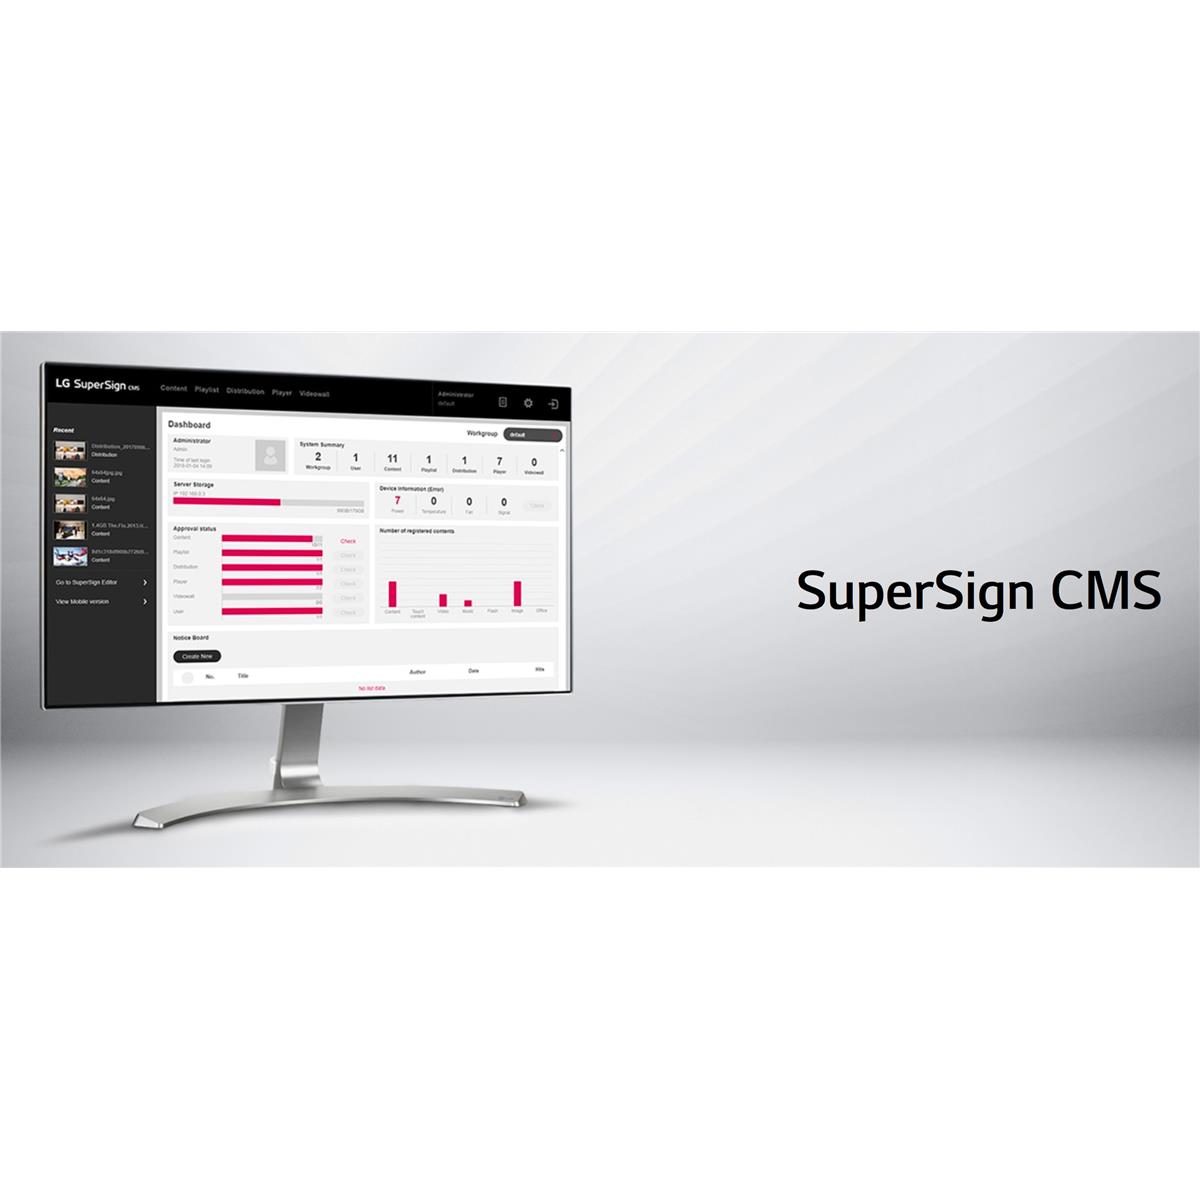 Image of LG SuperSign CMS 2-Year Solution Renewal